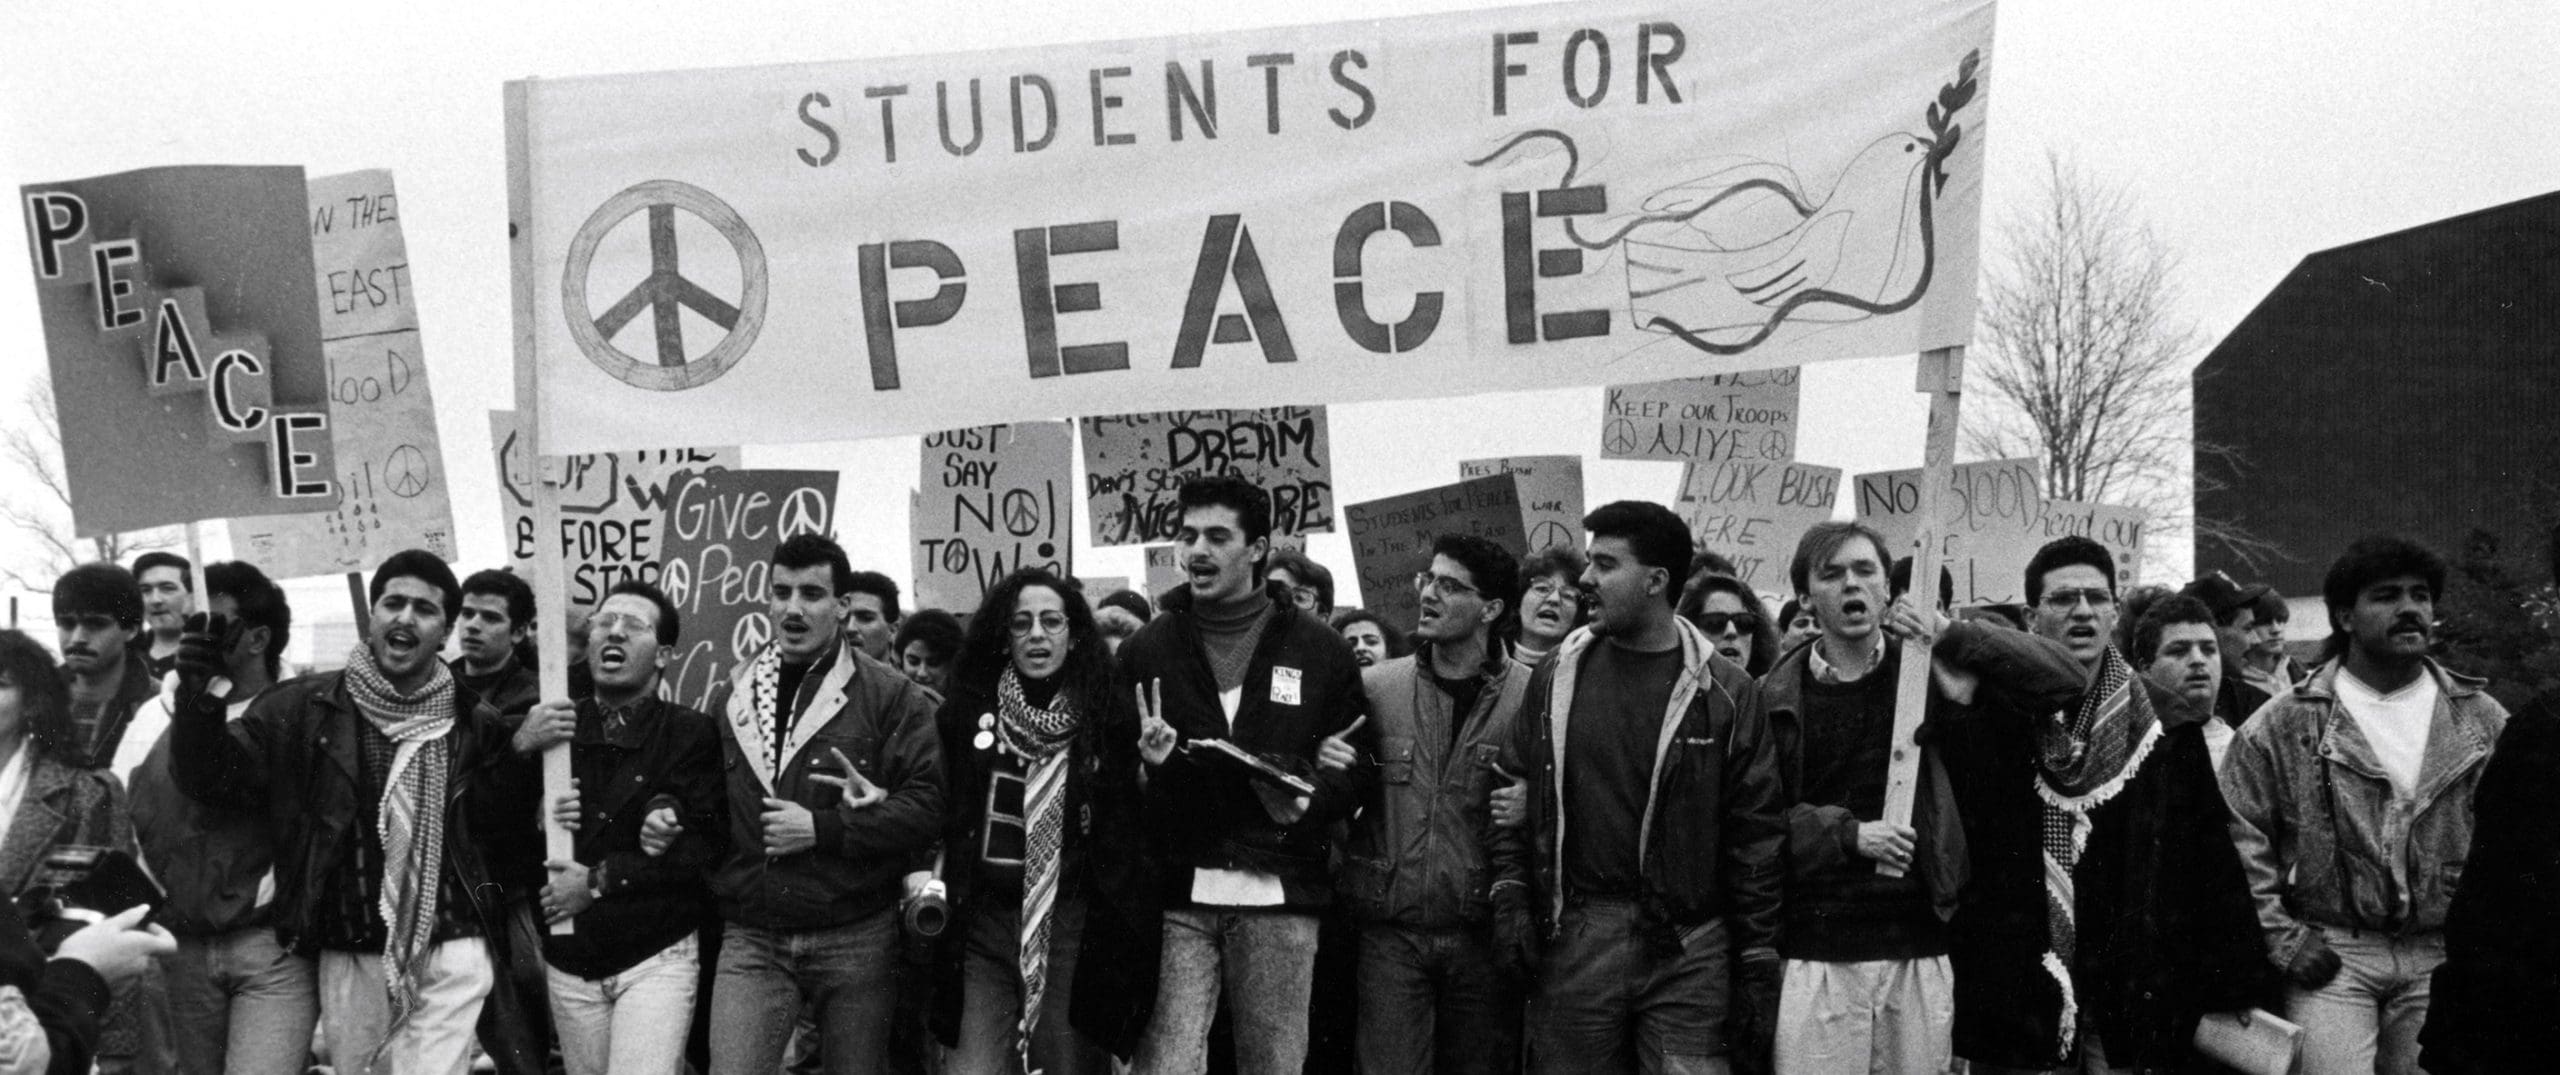 UM-Dearborn Students for Peace in Middle East march against activity in the Persian Gulf, Feb. 1991